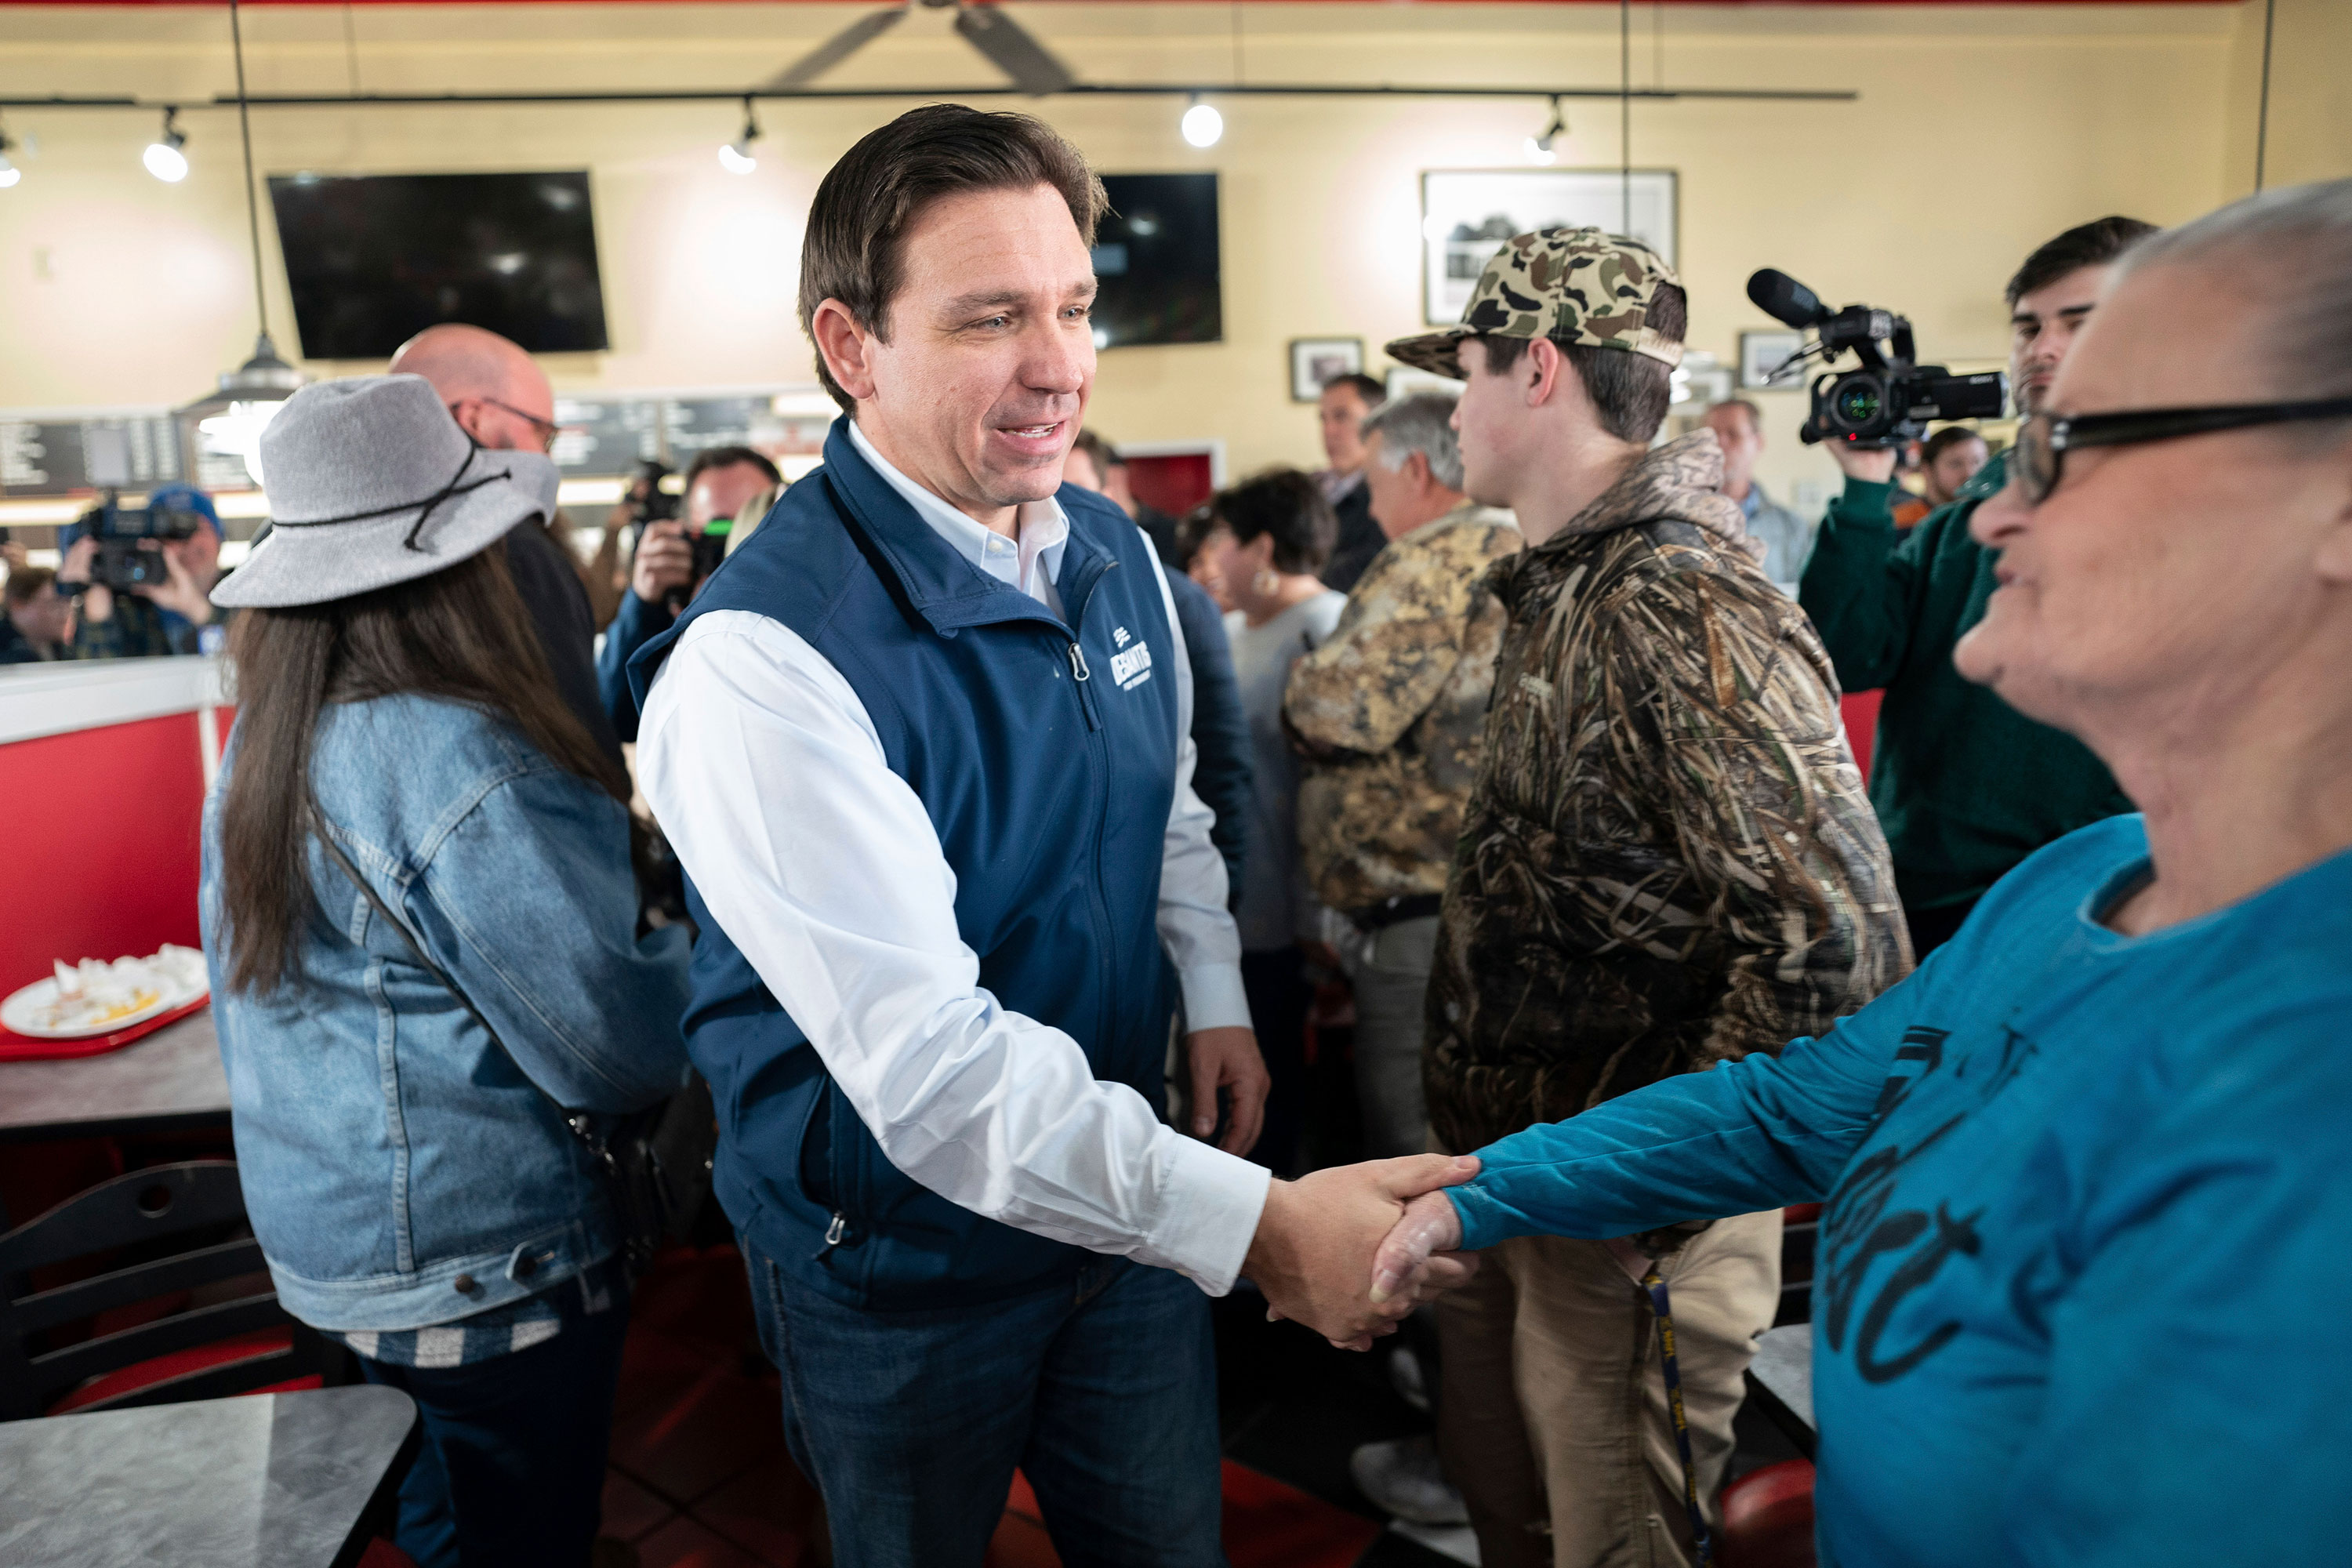 Florida Gov. Ron DeSantis greets people during a campaign event in Florence, South Carolina, on Saturday. 